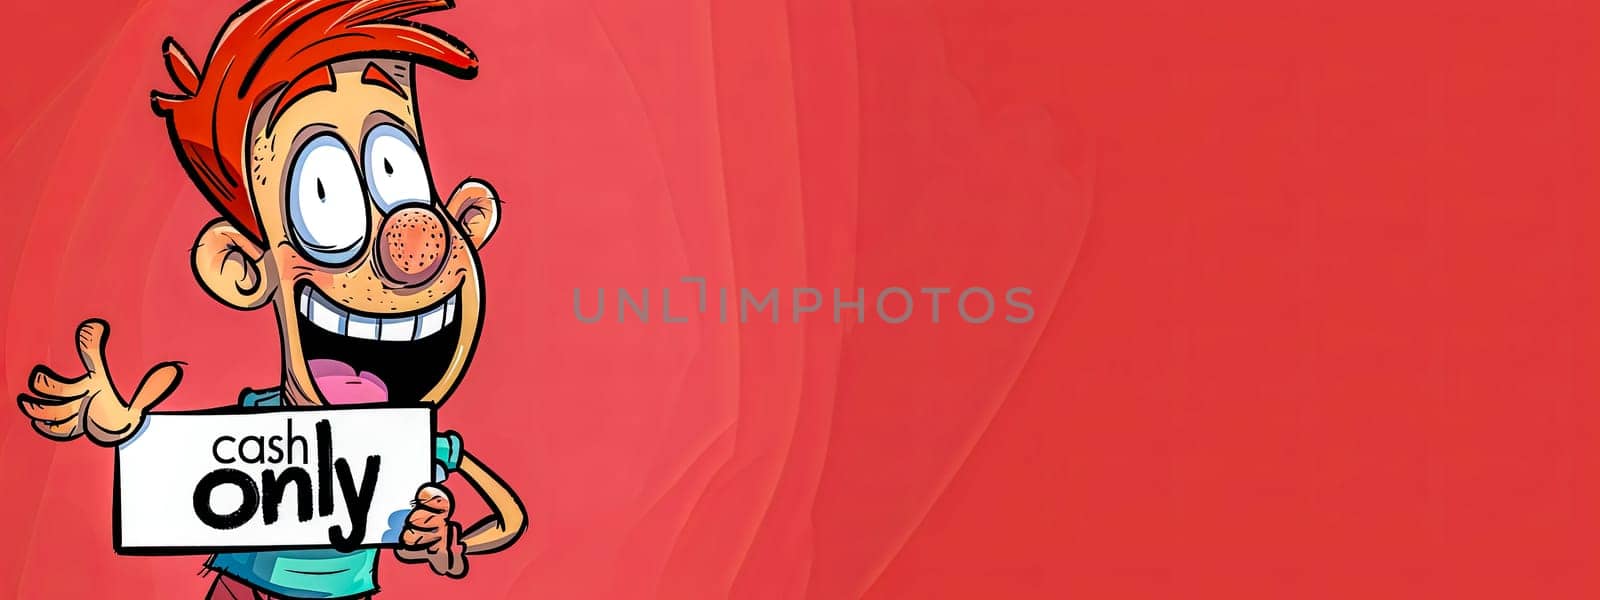 Cheerful cartoon character holding 'cash only' sign by Edophoto